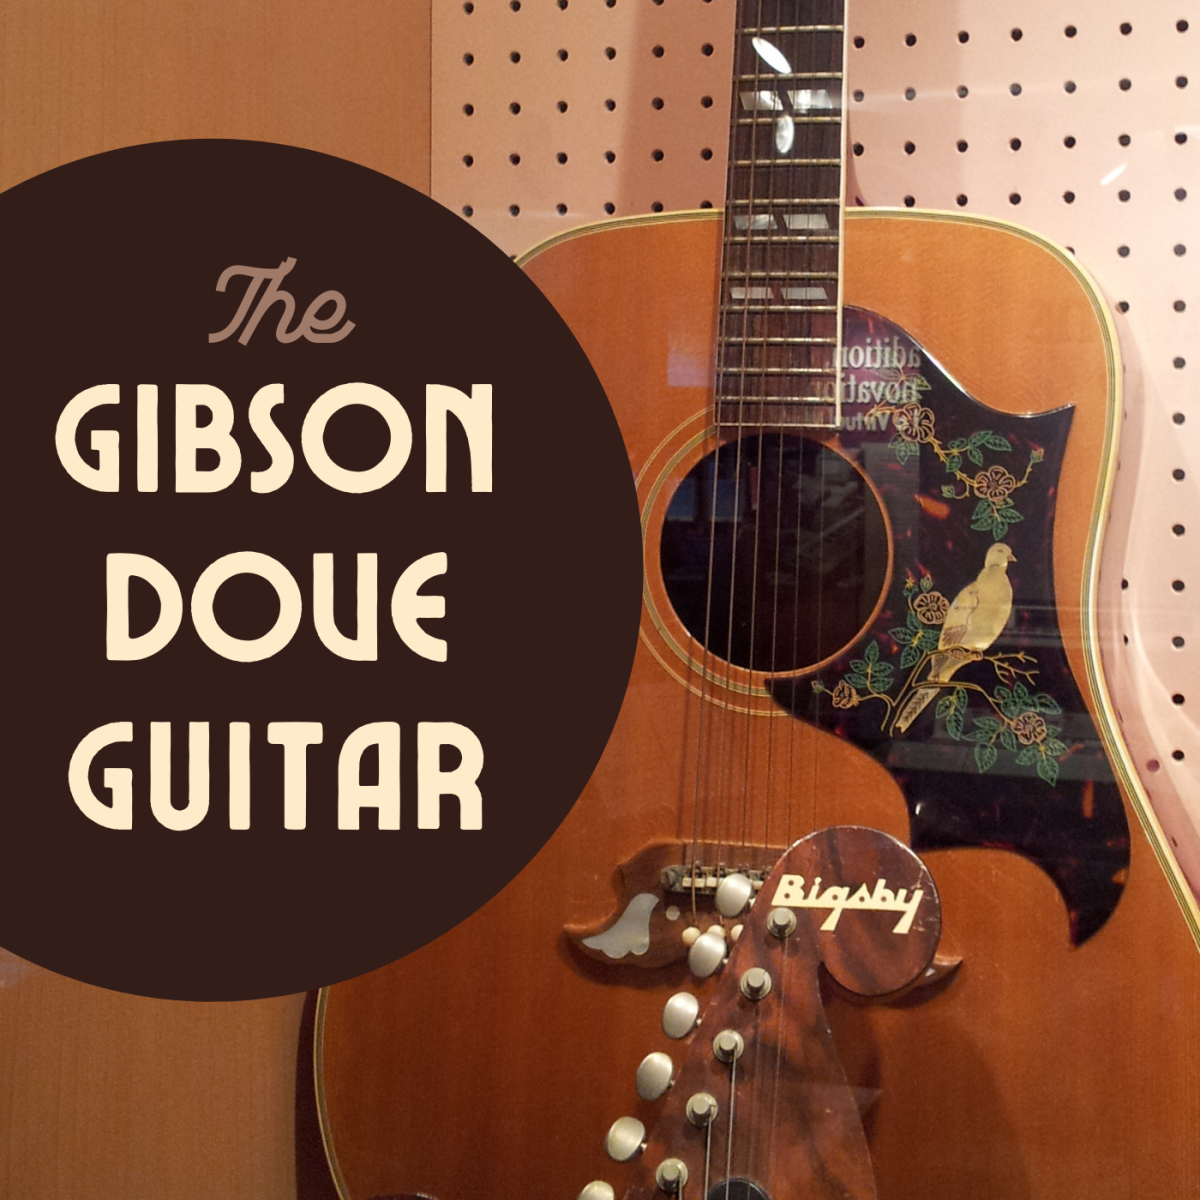 Learn about Gibson's famous Dove guitar, pictured here in a music museum.